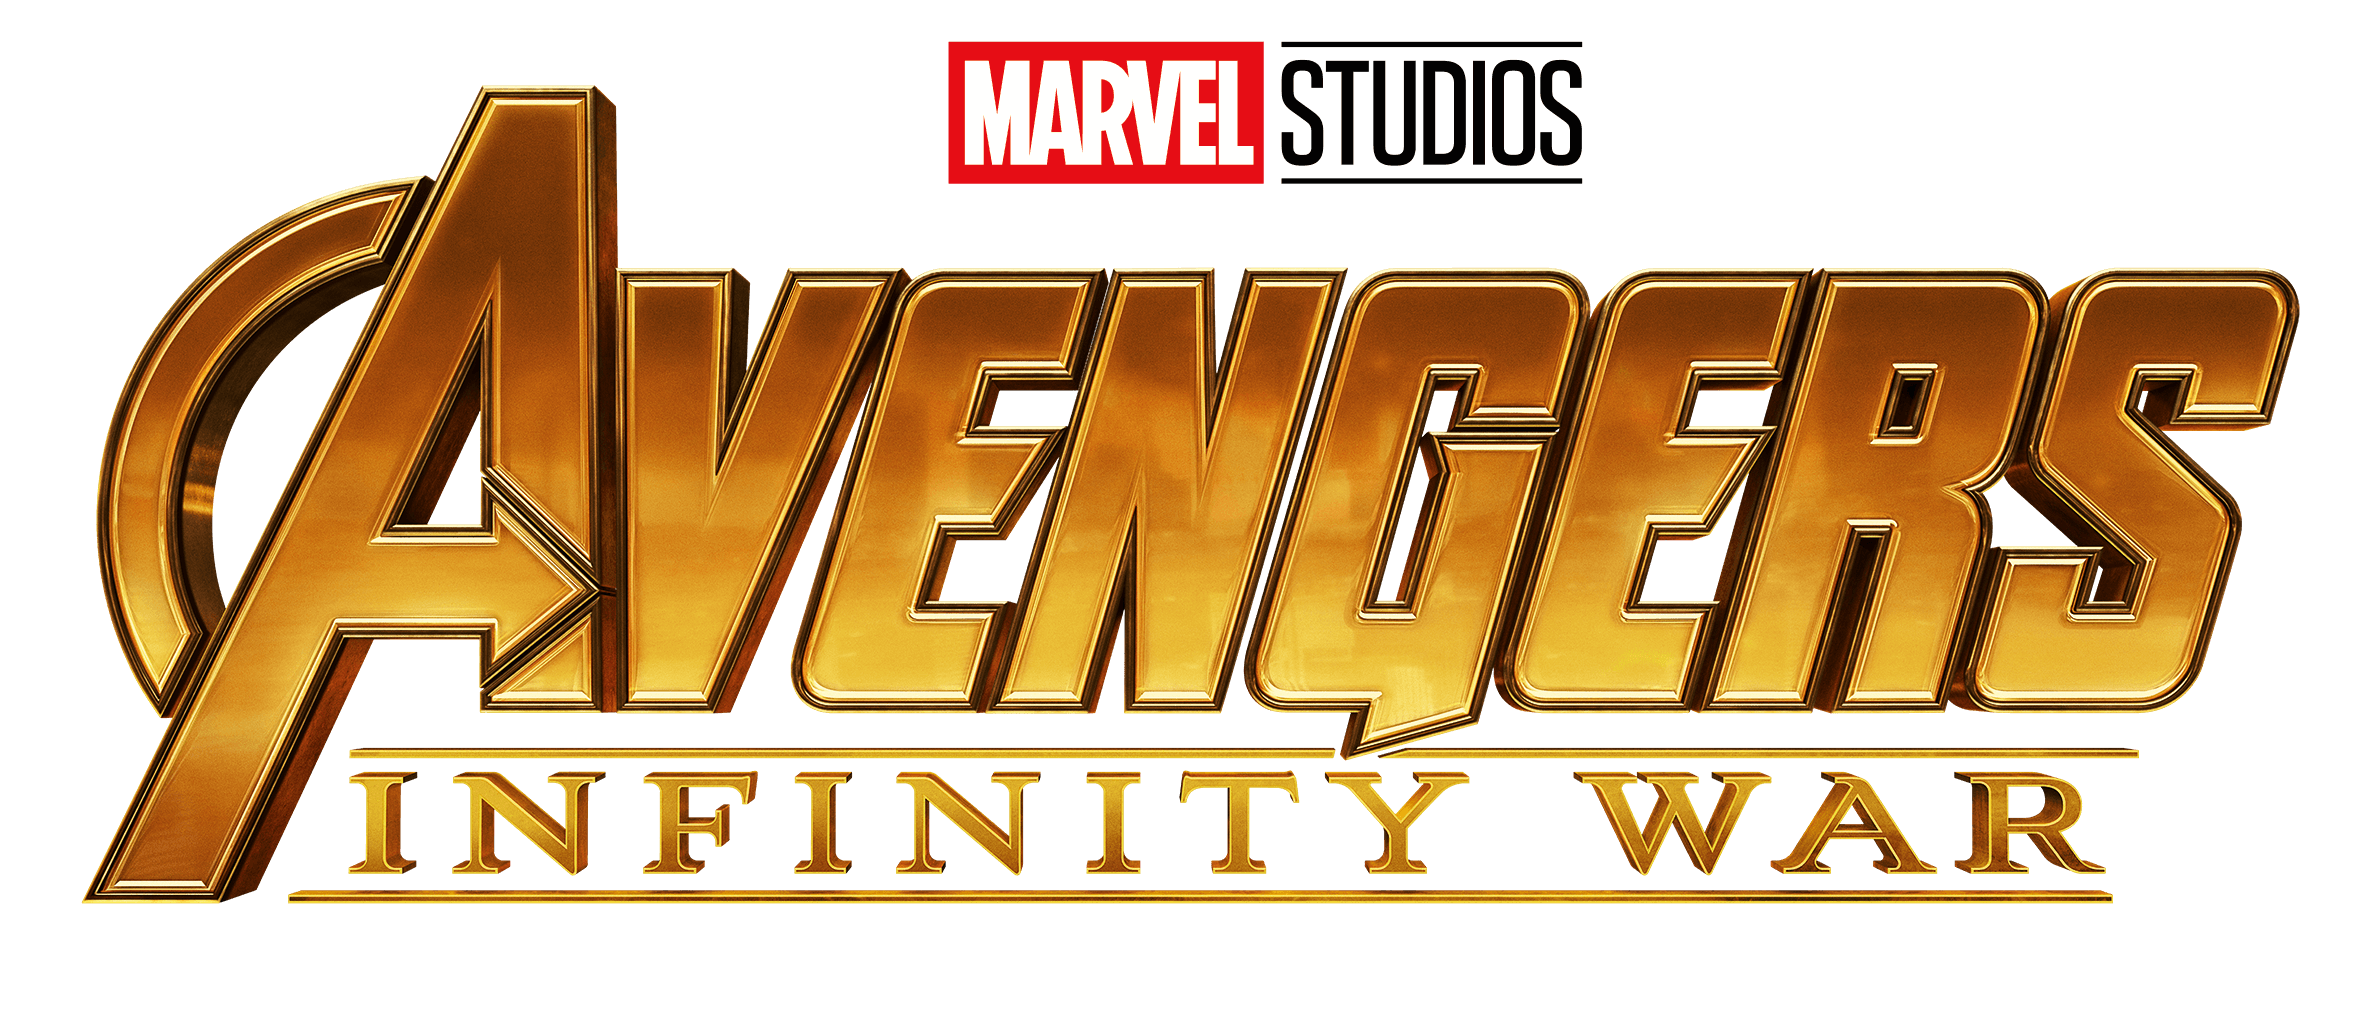 Iw Logo - Mods, change the sidebar IW logo to this, please? : marvelstudios